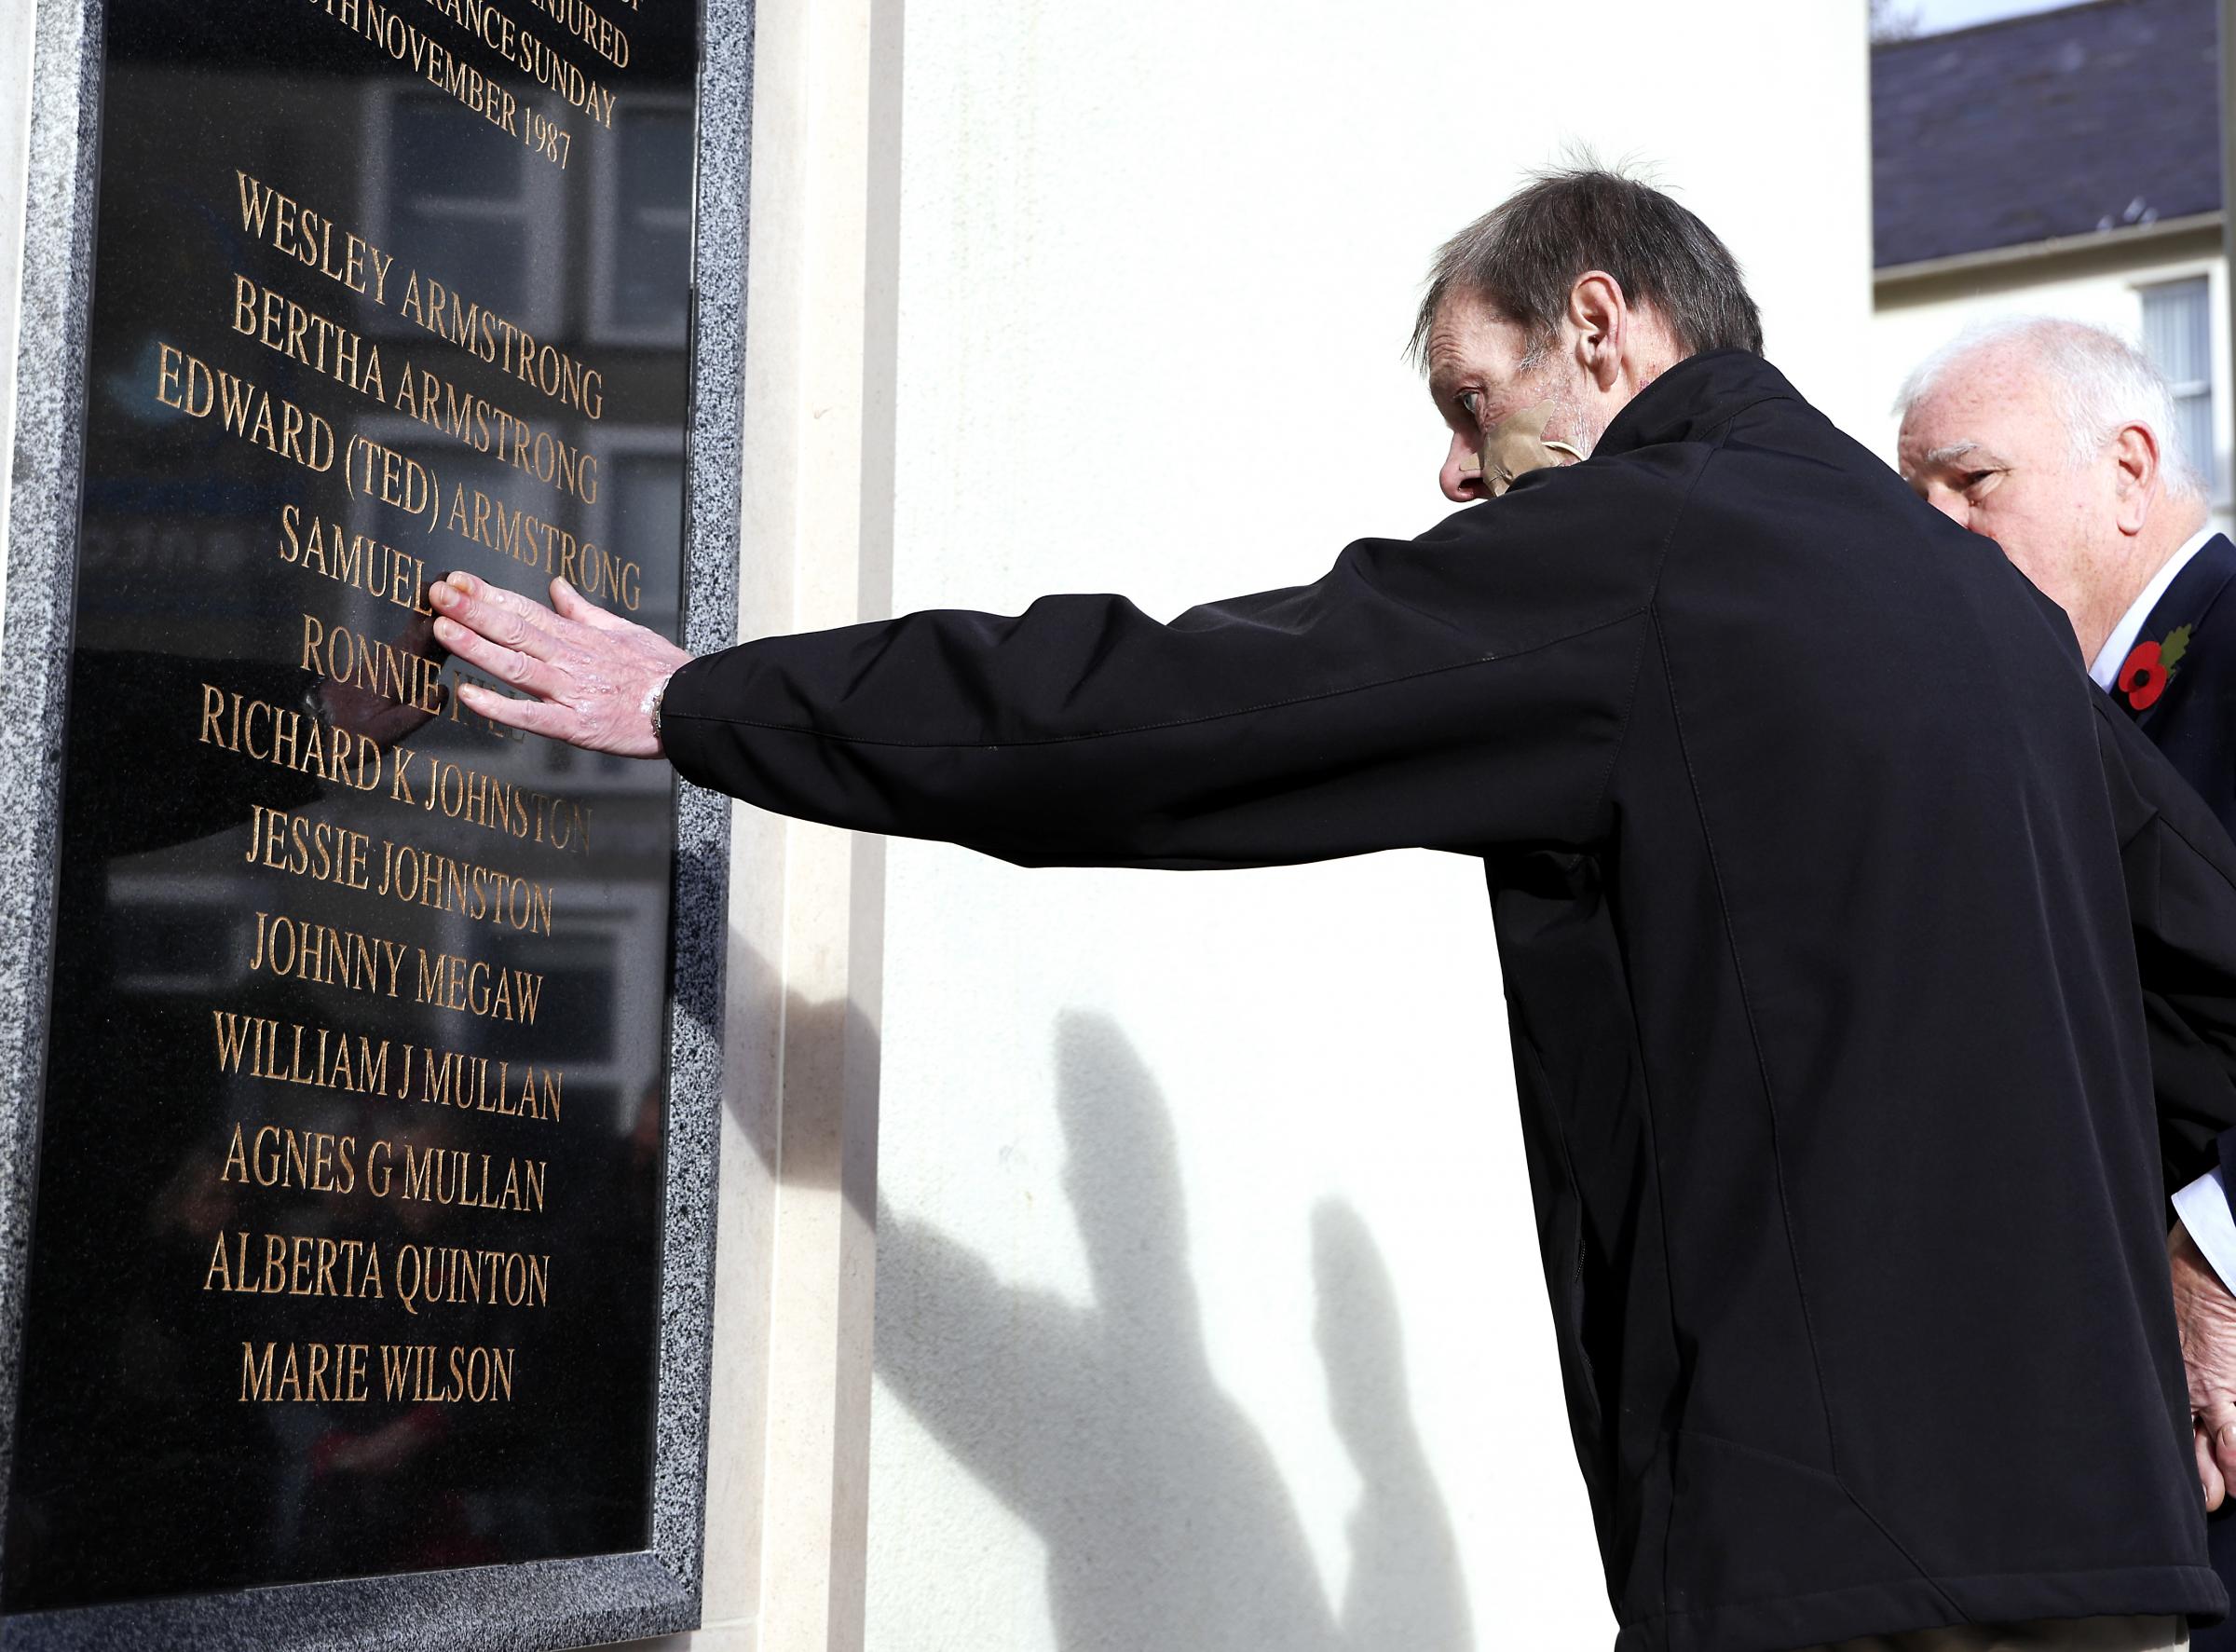 Keith Gault, touches the name of his father Samuel who was killed in The Enniskillen Bomb after lawing flowers during the service.